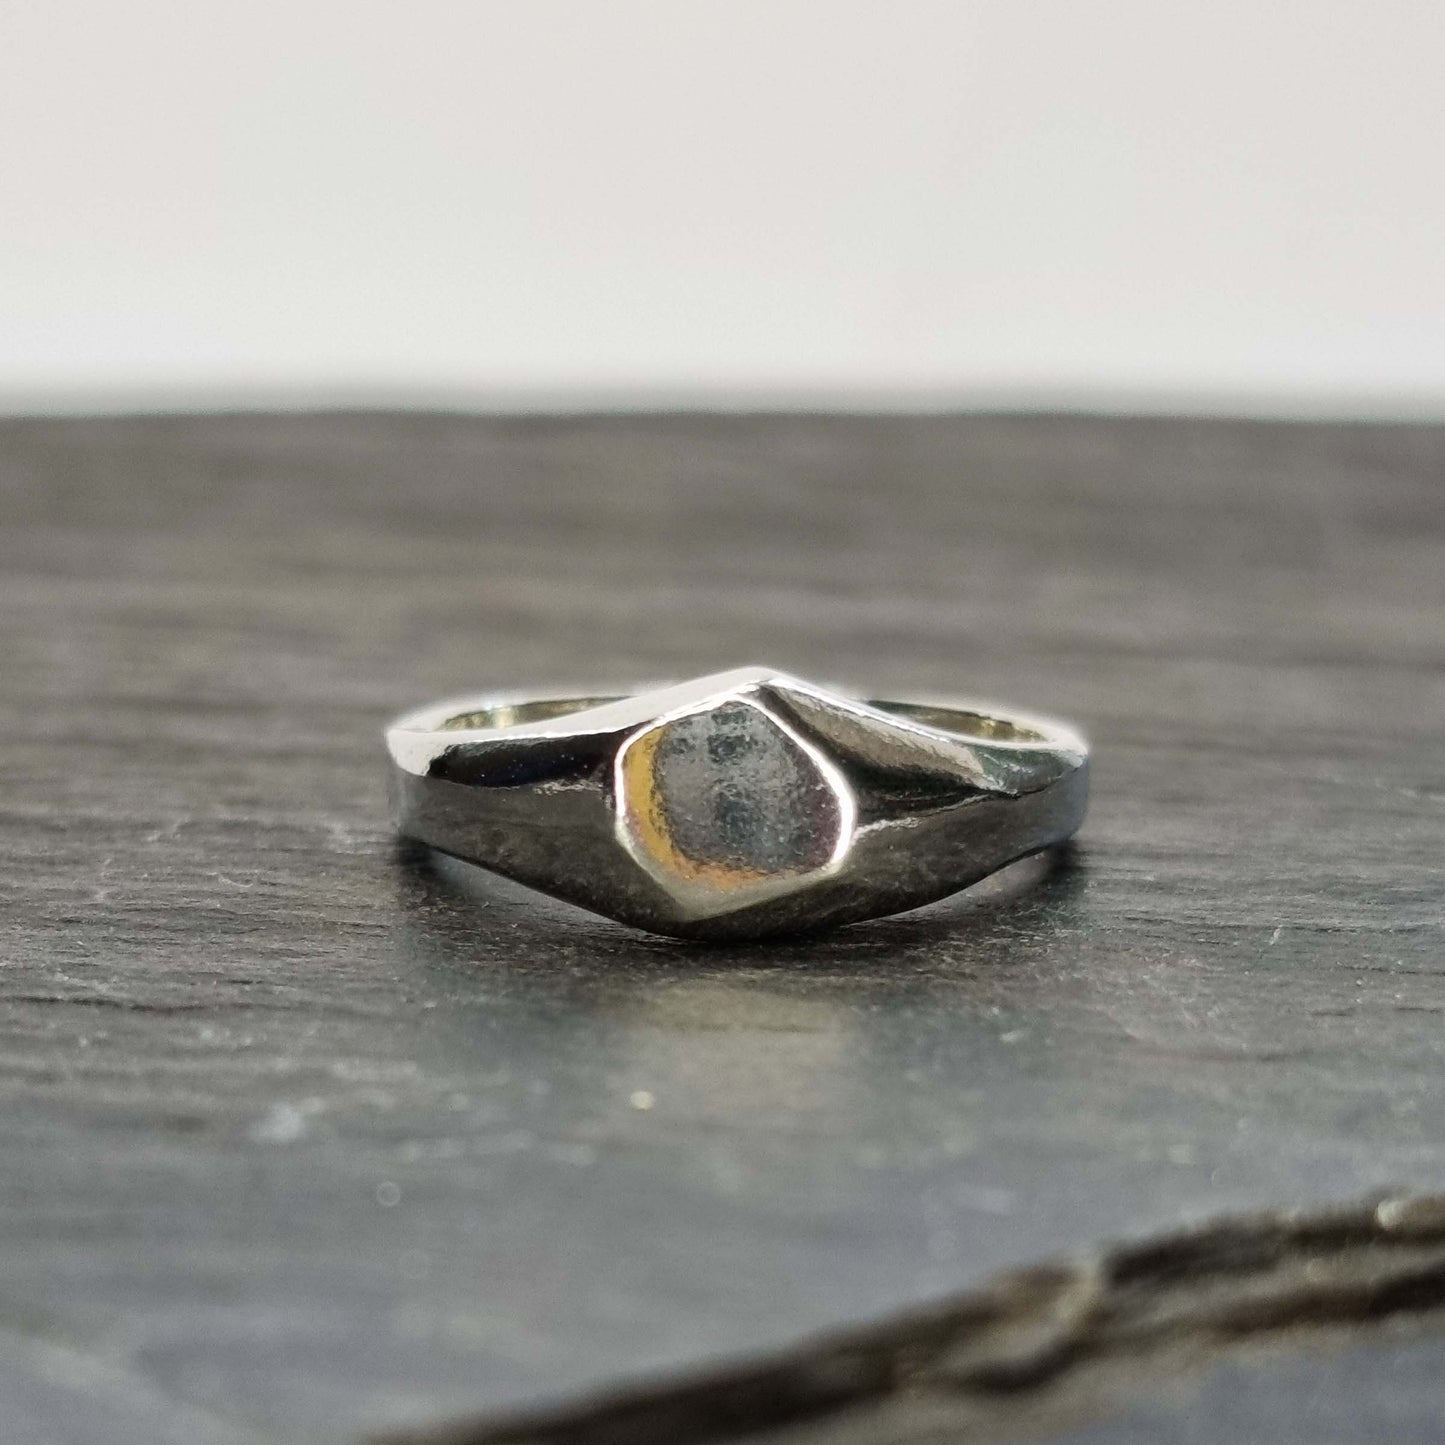 A silver geometric signet ring with flat head.